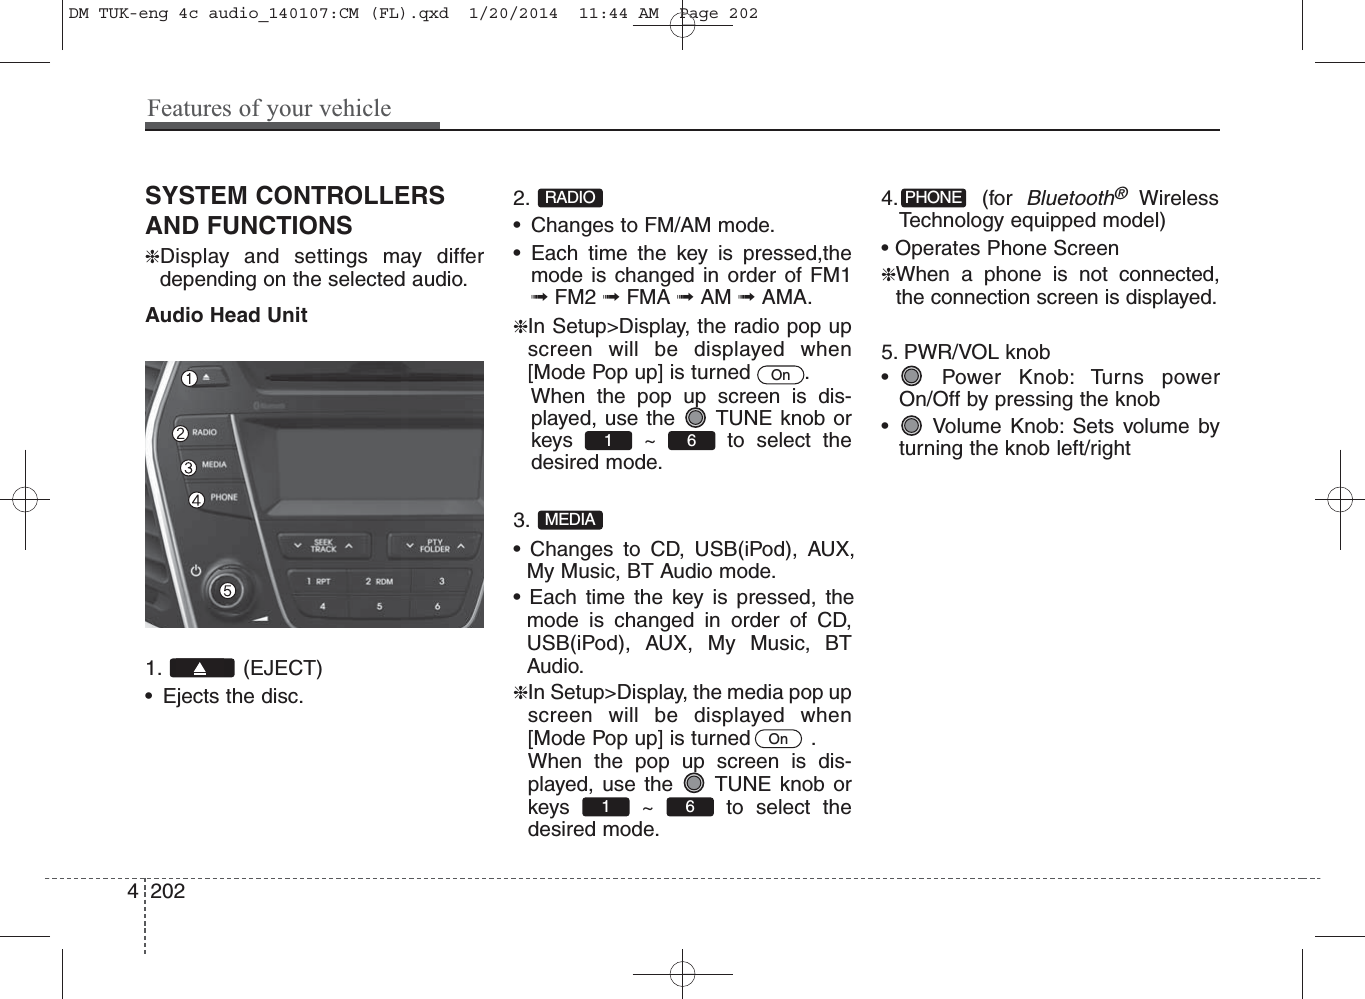 SYSTEM CONTROLLERSAND FUNCTIONS❈Display and settings may differdepending on the selected audio.Audio Head Unit1. (EJECT)• Ejects the disc.2. • Changes to FM/AM mode.• Each time the key is pressed,themode is changed in order of FM1➟FM2 ➟FMA ➟AM ➟AMA.❈In Setup&gt;Display, the radio pop upscreen will be displayed when[Mode Pop up] is turned  .When the pop up screen is dis-played, use the  TUNE knob orkeys ~ to select thedesired mode.3. • Changes to CD, USB(iPod), AUX,My Music, BT Audio mode.• Each time the key is pressed, themode is changed in order of CD,USB(iPod), AUX, My Music, BTAudio.❈In Setup&gt;Display, the media pop upscreen will be displayed when[Mode Pop up] is turned   .When the pop up screen is dis-played, use the  TUNE knob orkeys ~ to select thedesired mode.   4. (for Bluetooth®WirelessTechnology equipped model)• Operates Phone Screen❈When a phone is not connected,the connection screen is displayed.5. PWR/VOL knob• Power Knob: Turns powerOn/Off by pressing the knob• Volume Knob: Sets volume byturning the knob left/rightPHONE61 OnMEDIA61 OnRADIO4 202Features of your vehicleDM TUK-eng 4c audio_140107:CM (FL).qxd  1/20/2014  11:44 AM  Page 202